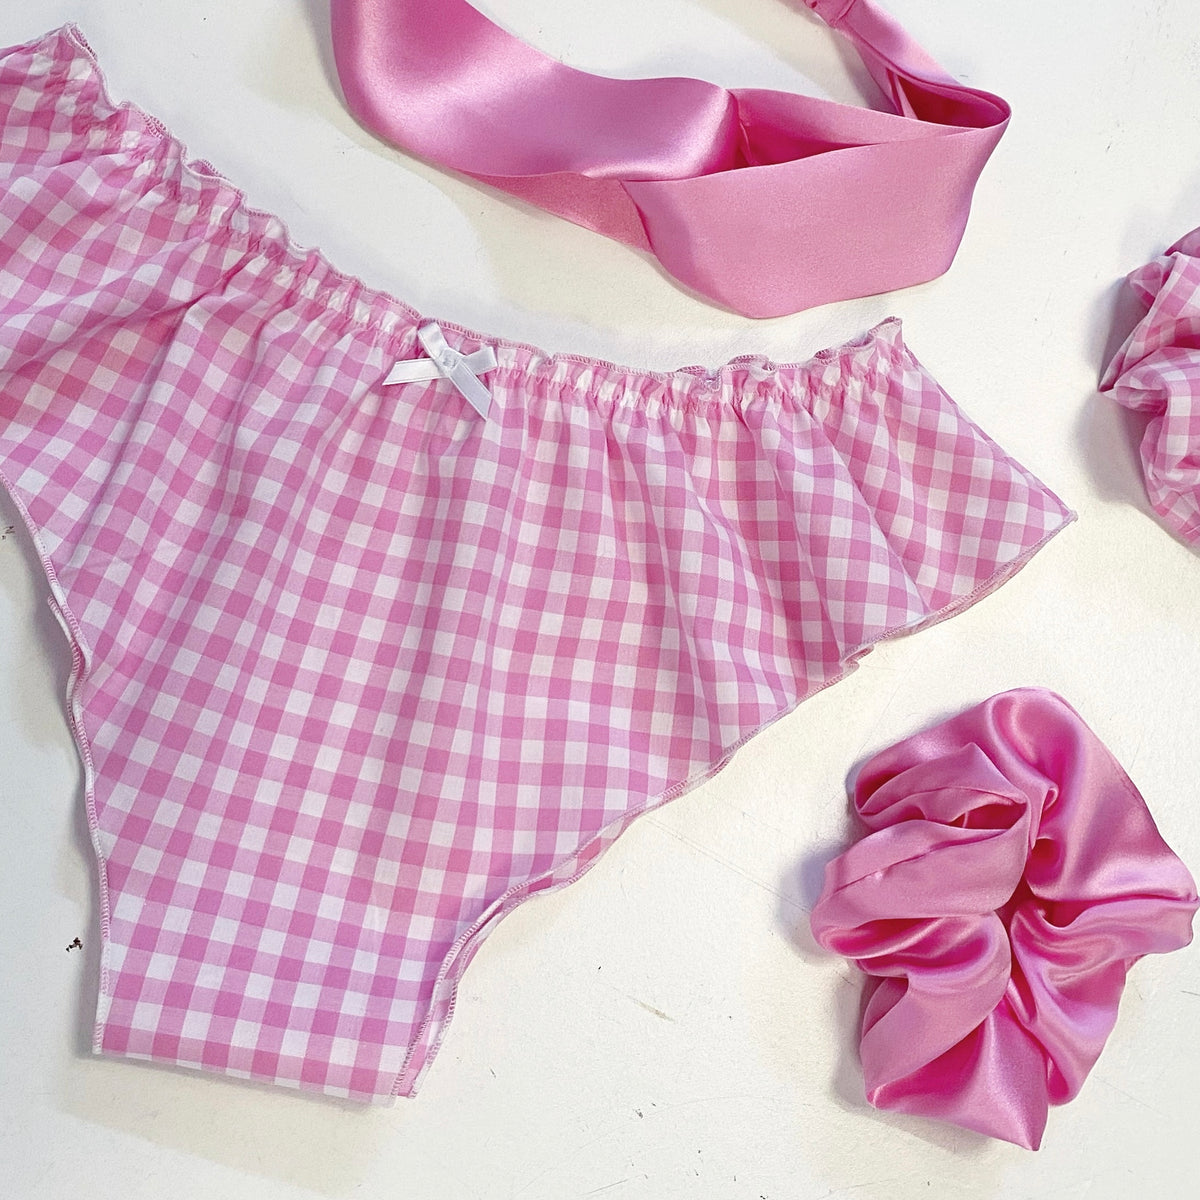 Mini French Knicker - Pink Cotton Gingham